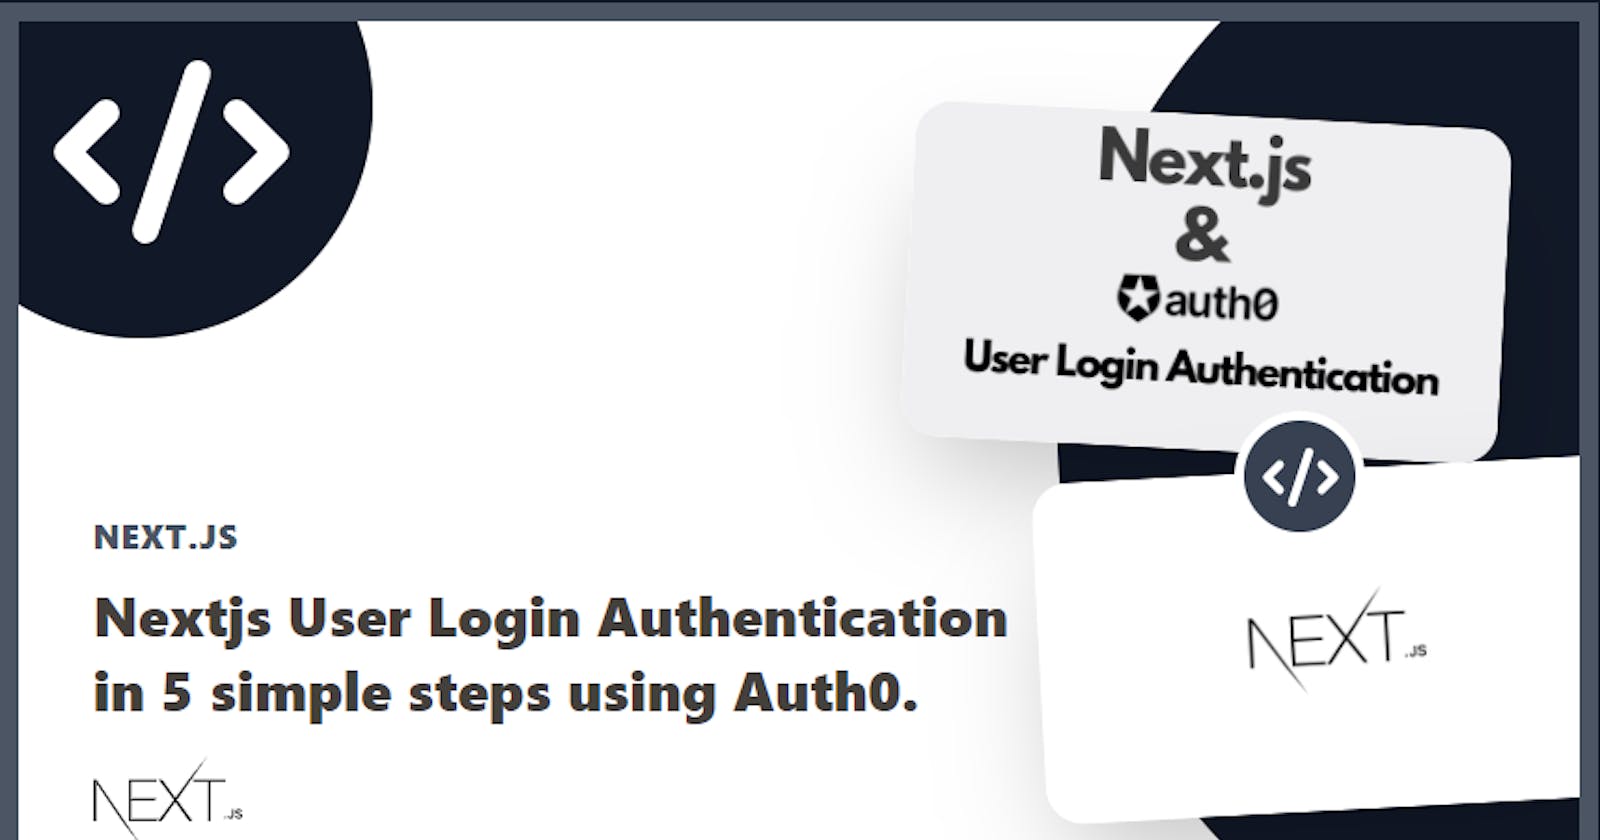 Nextjs User Login Authentication in 5 simple steps using Auth0.